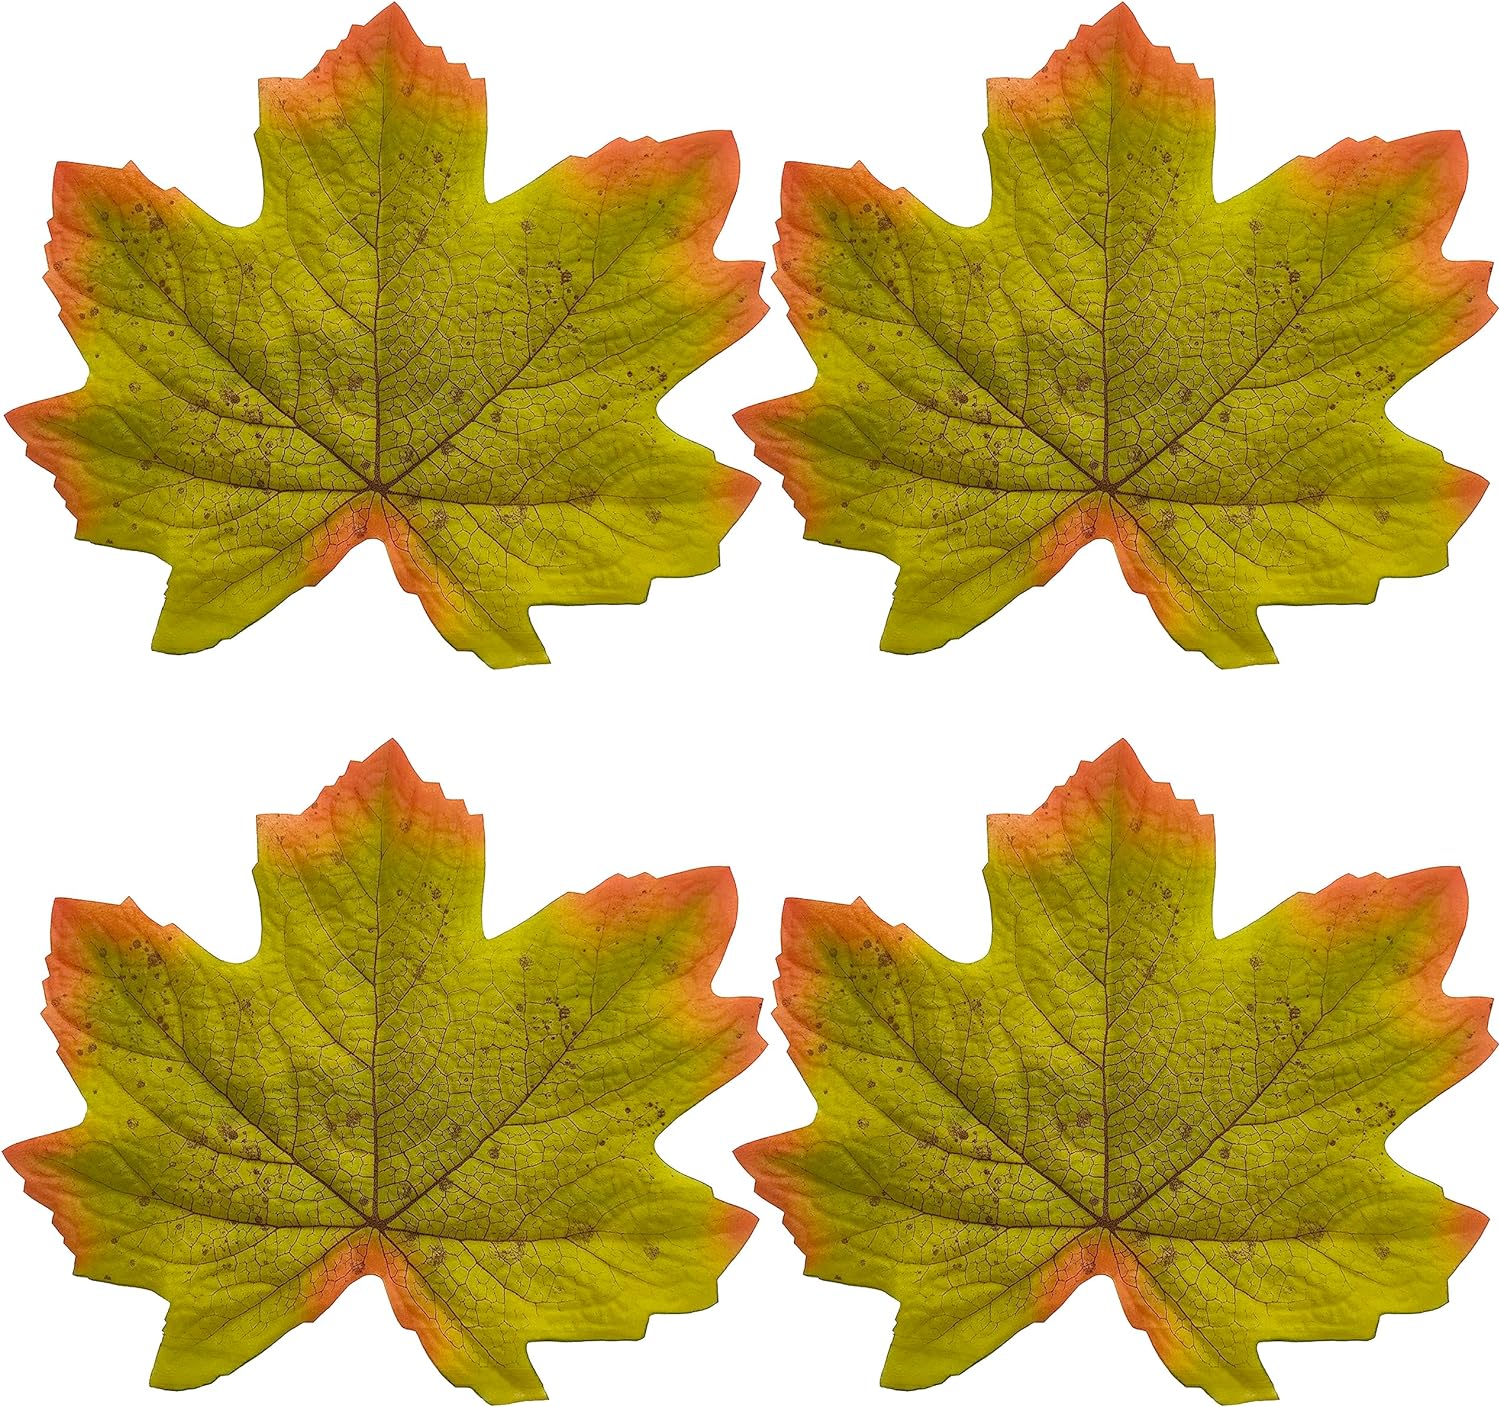 Bulk 50 Pcs Hawaiian Leaf Table Mats Perfect for Summer Parties Weddings and More Wholesale